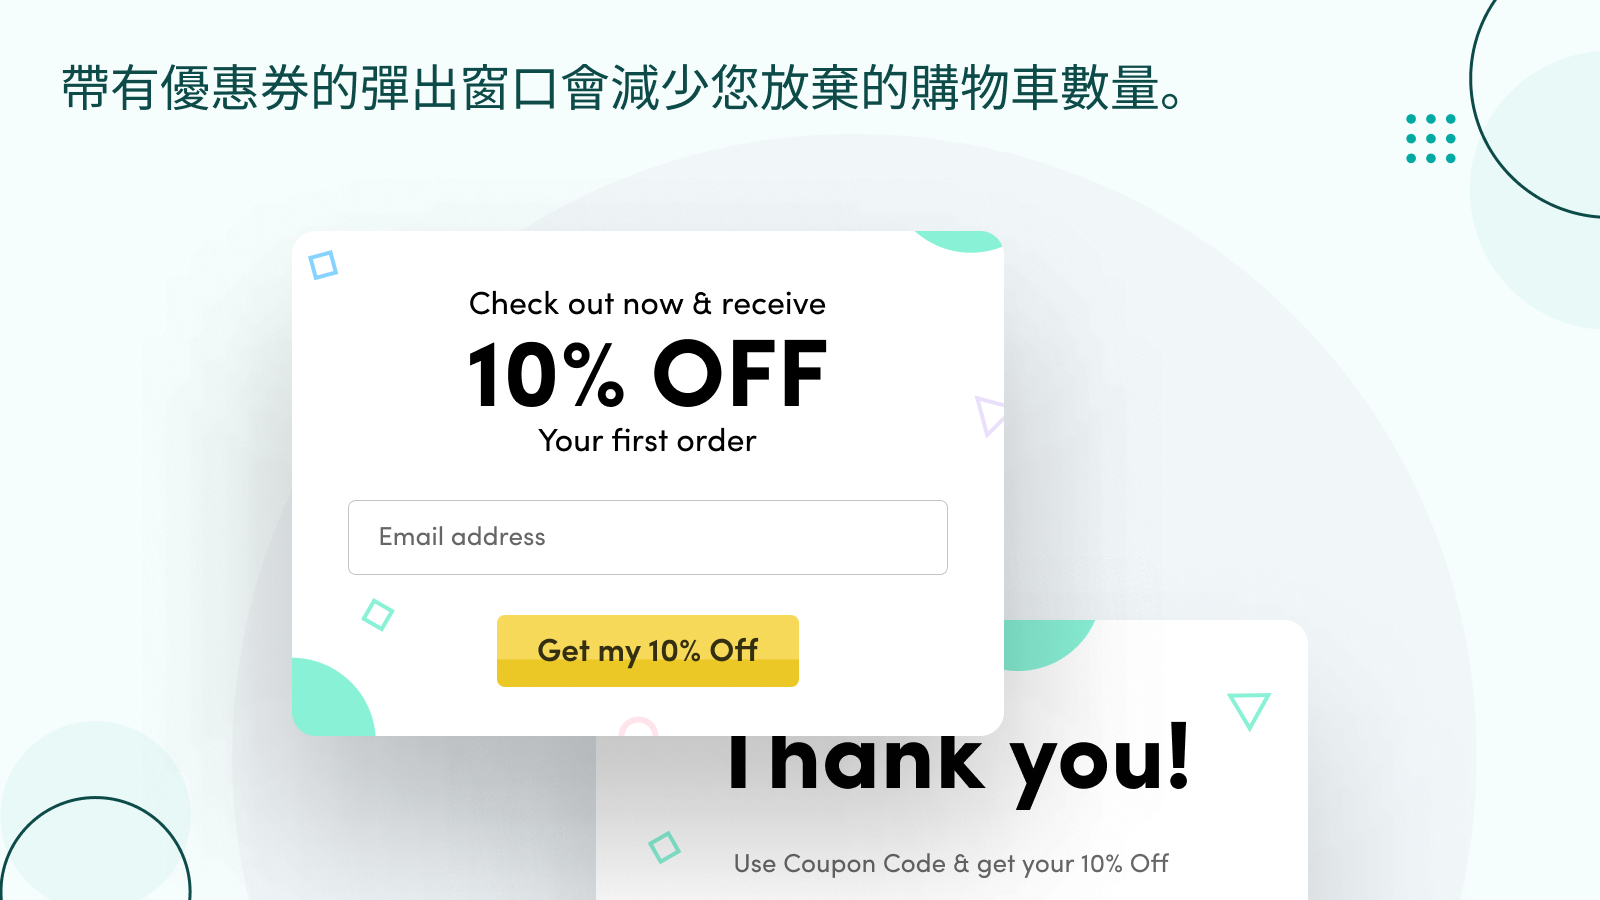 Popups w/ Coupons减少您的ACR。